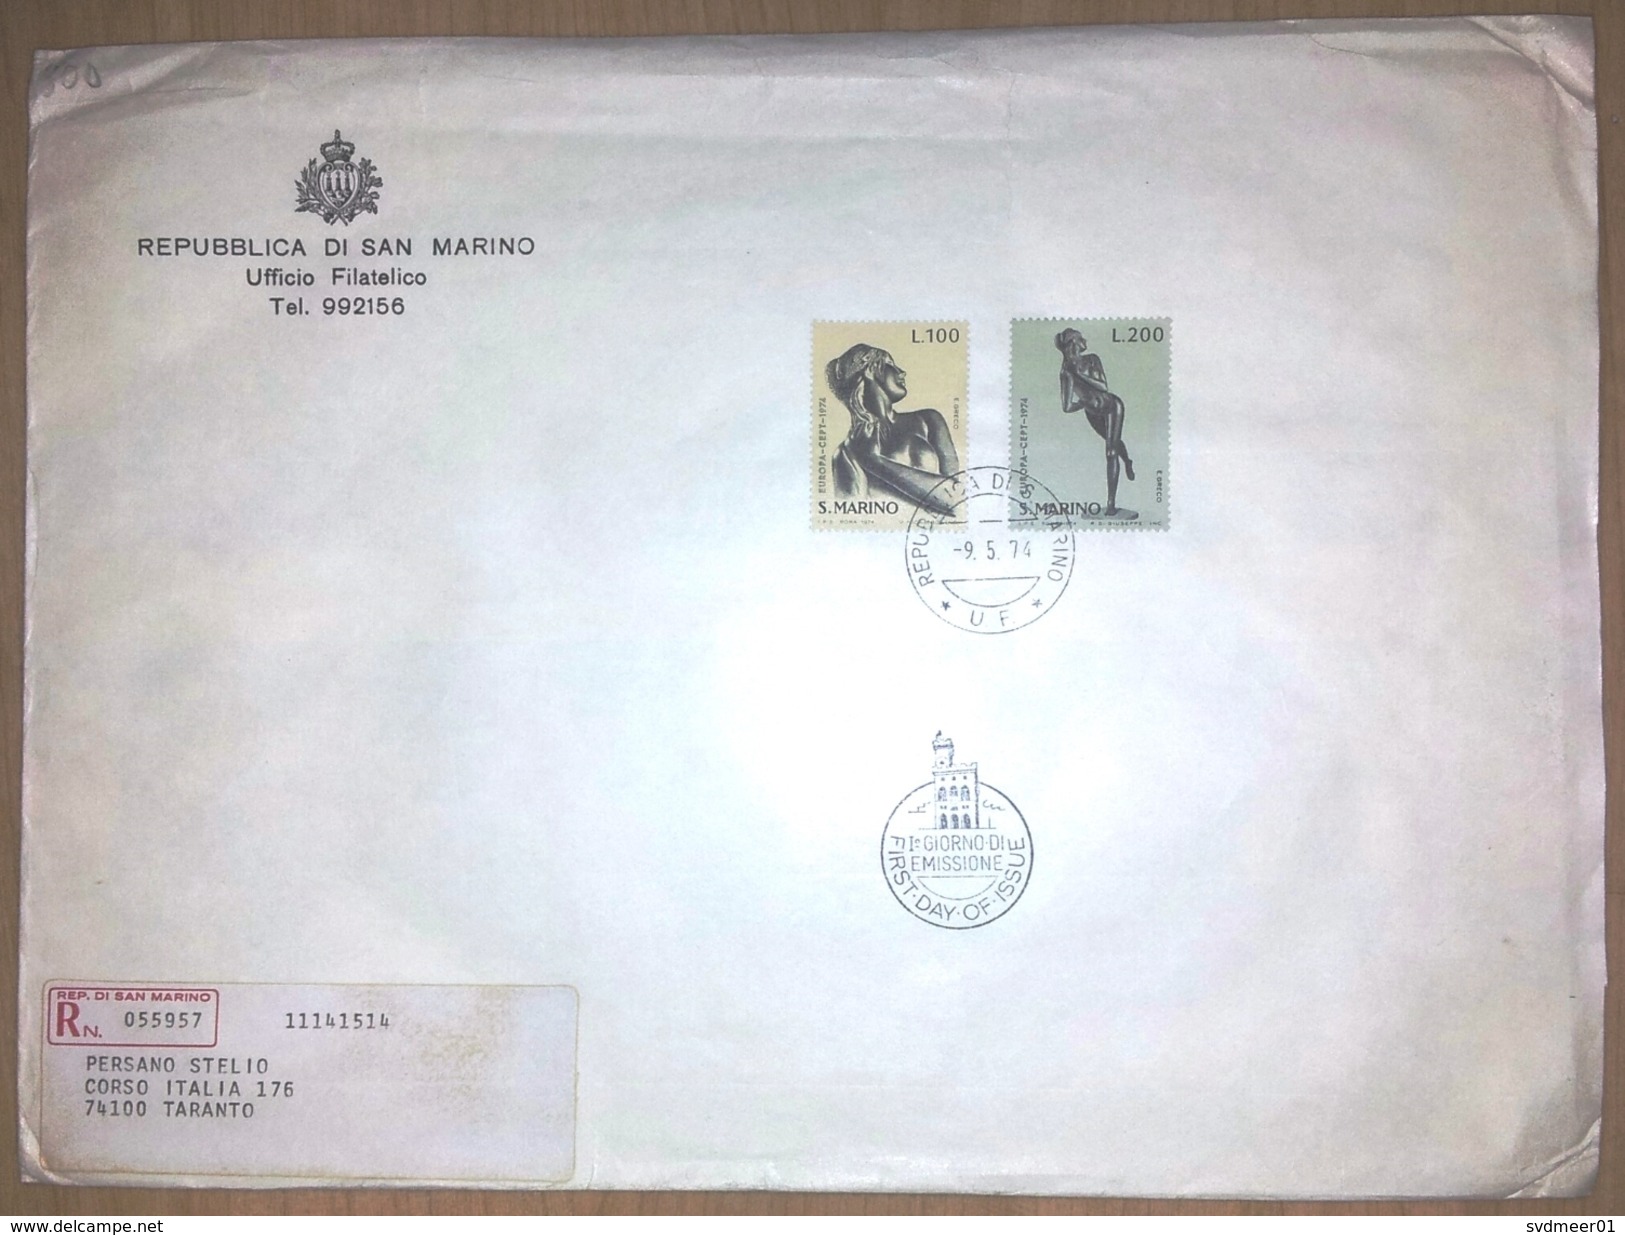 San Marino: Large Official Registered Cover, 1974, 2 Stamps, Europa CEPT, Statues Greco, Art, Sculptures (creases) - Covers & Documents